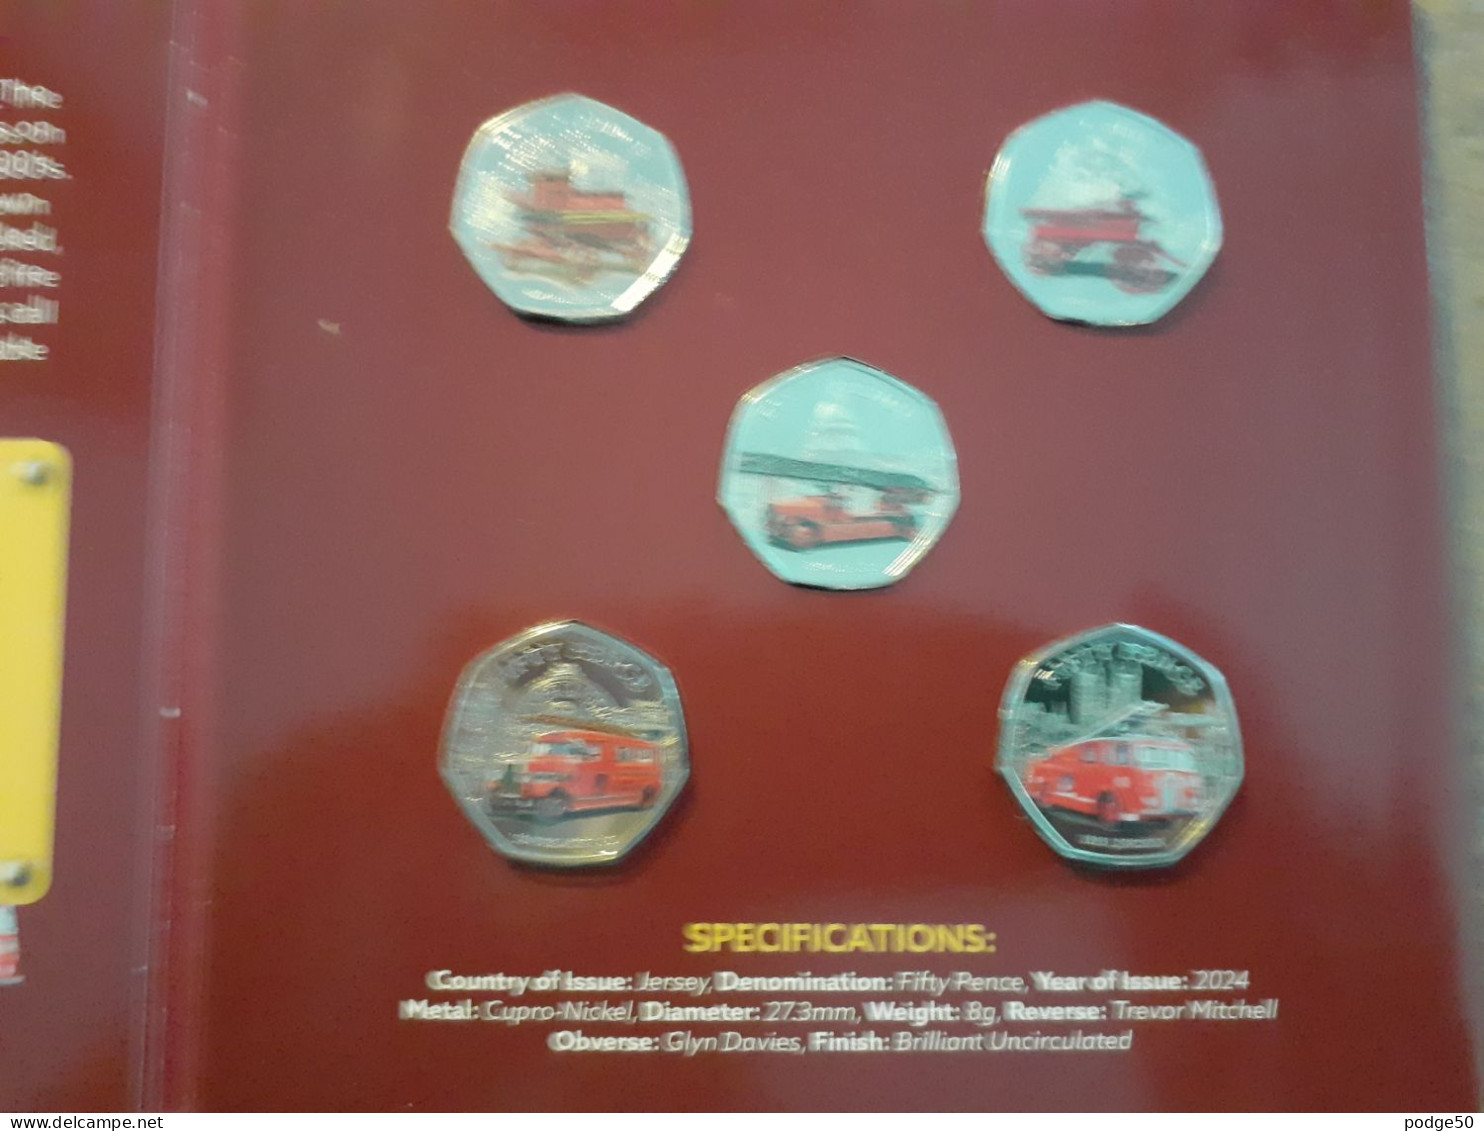 RARE ISLE OF MAN ARTIST'S EDITION FIRE BRIGADE COLOURED FIFTY PENCE COLLECTION ONLY 200 ISSUED - Isle Of Man